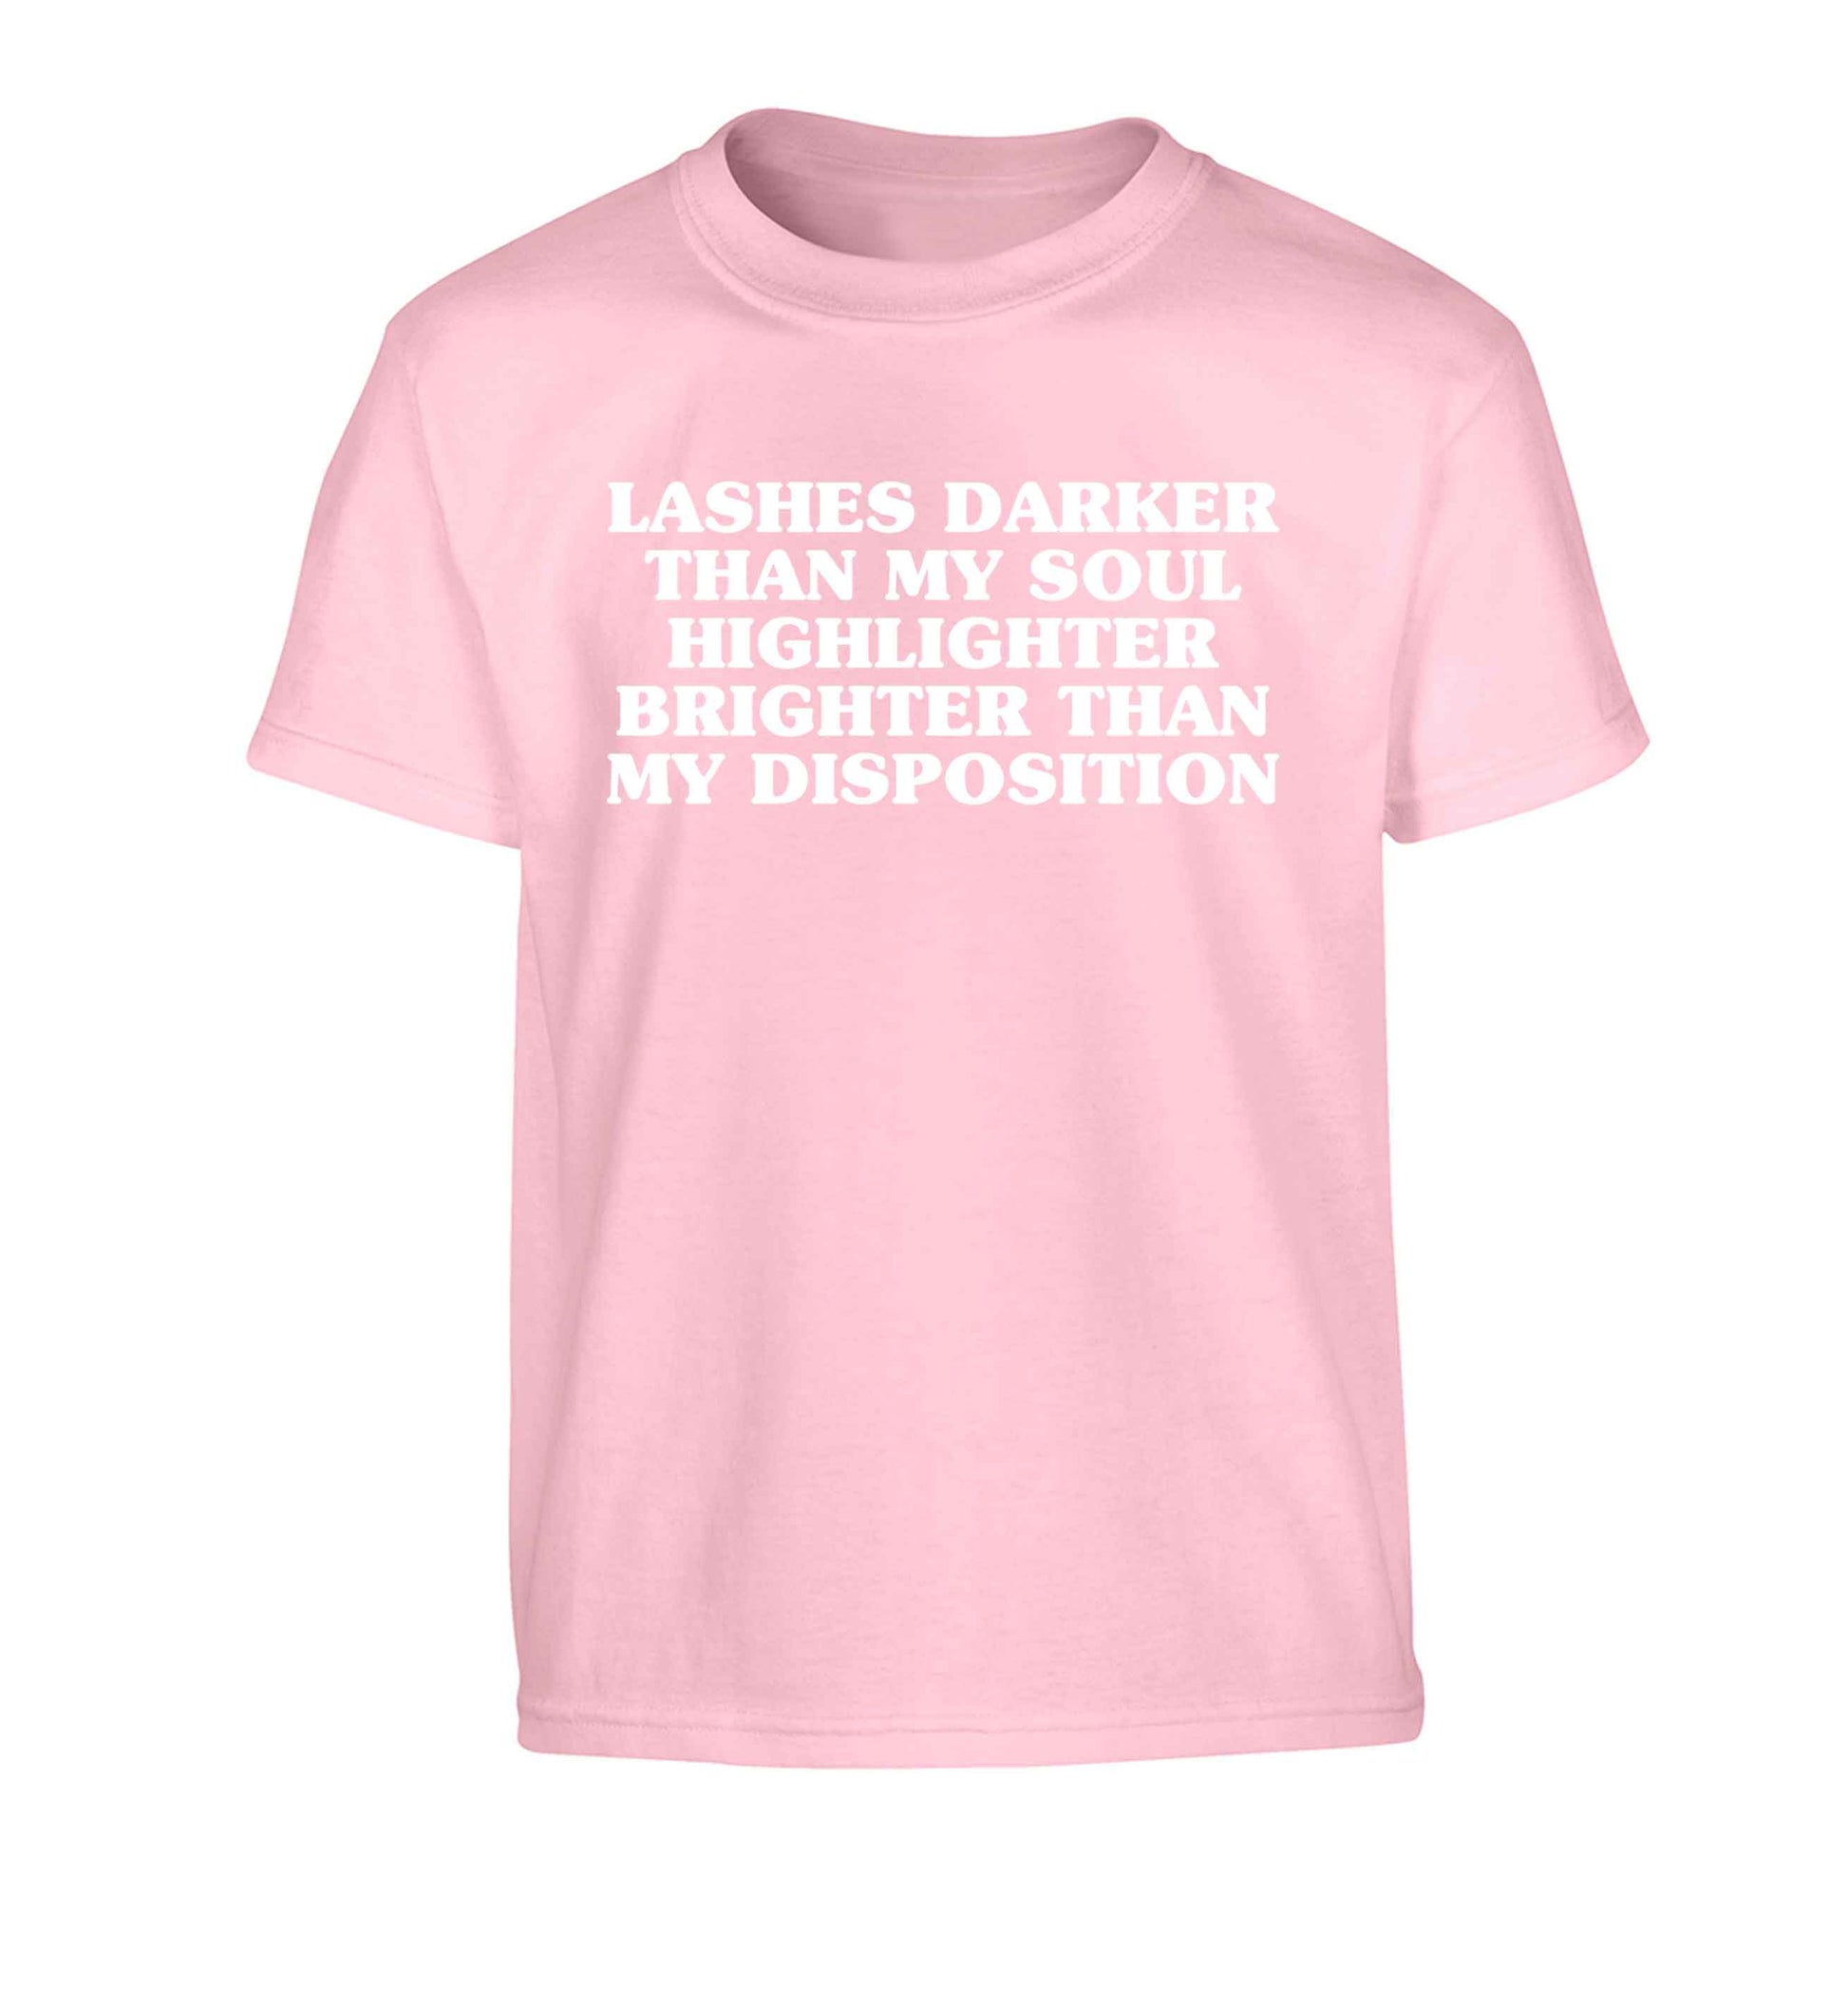 Lashes darker than my soul, highlighter brighter than my disposition Children's light pink Tshirt 12-13 Years